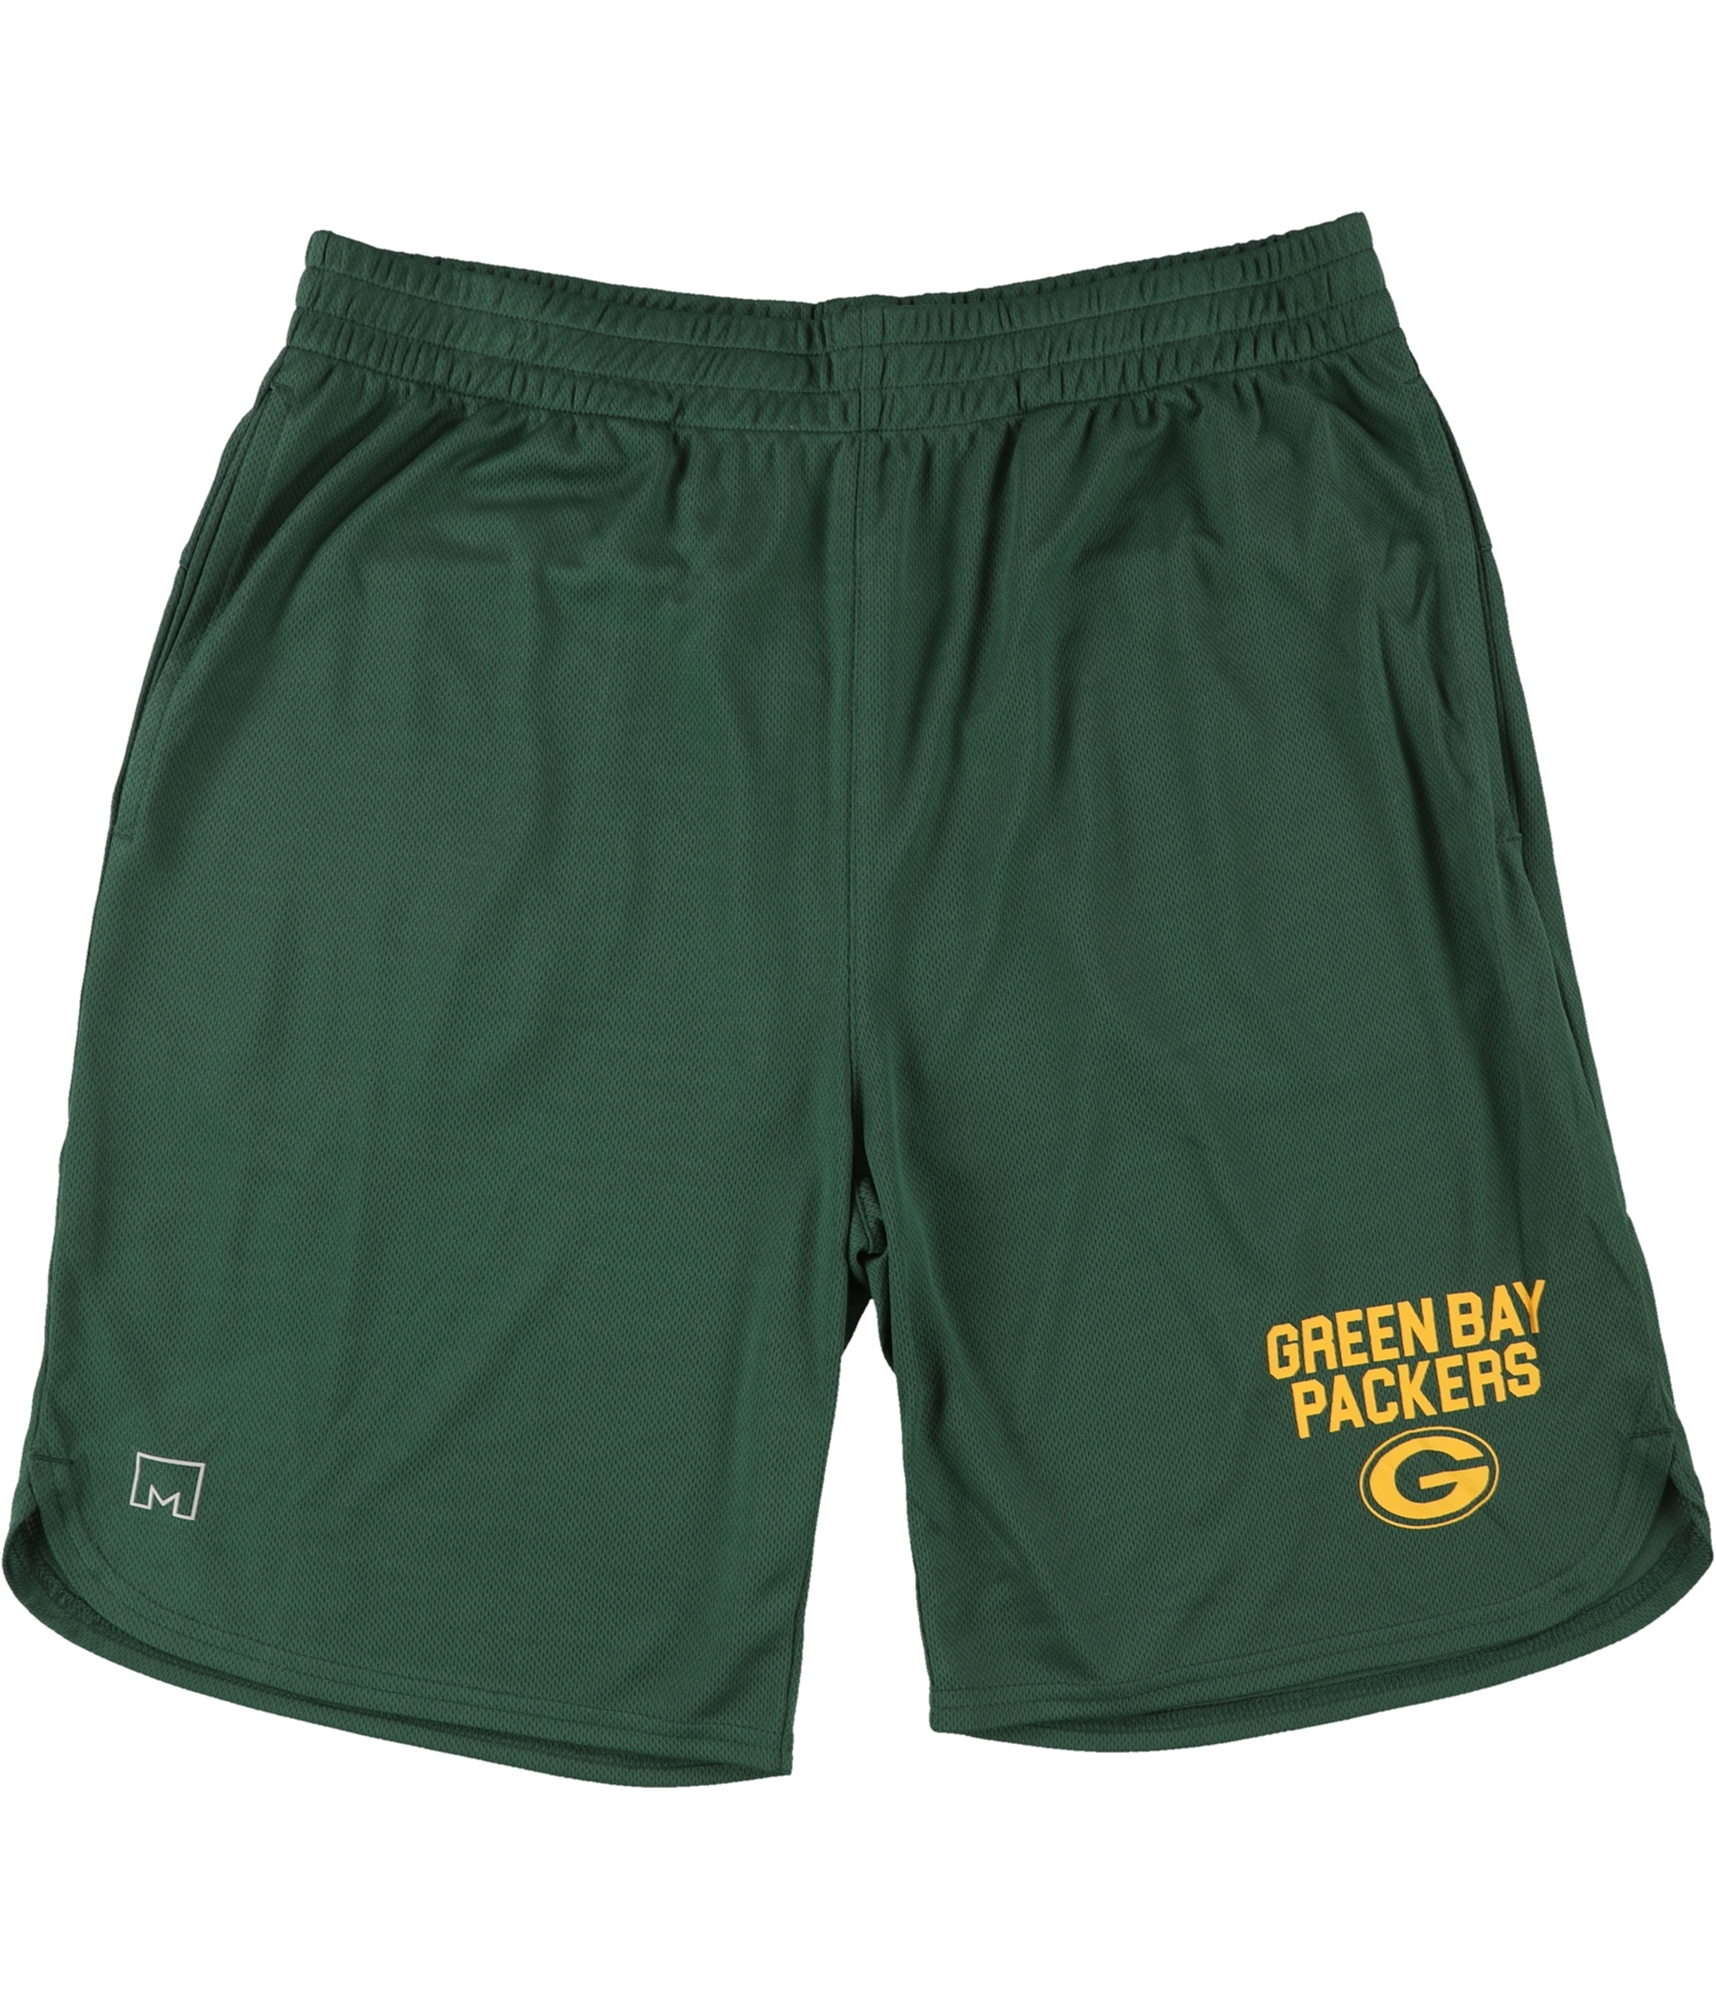 Buy a G-Iii Sports Mens Green Bay Packers Athletic Workout Shorts